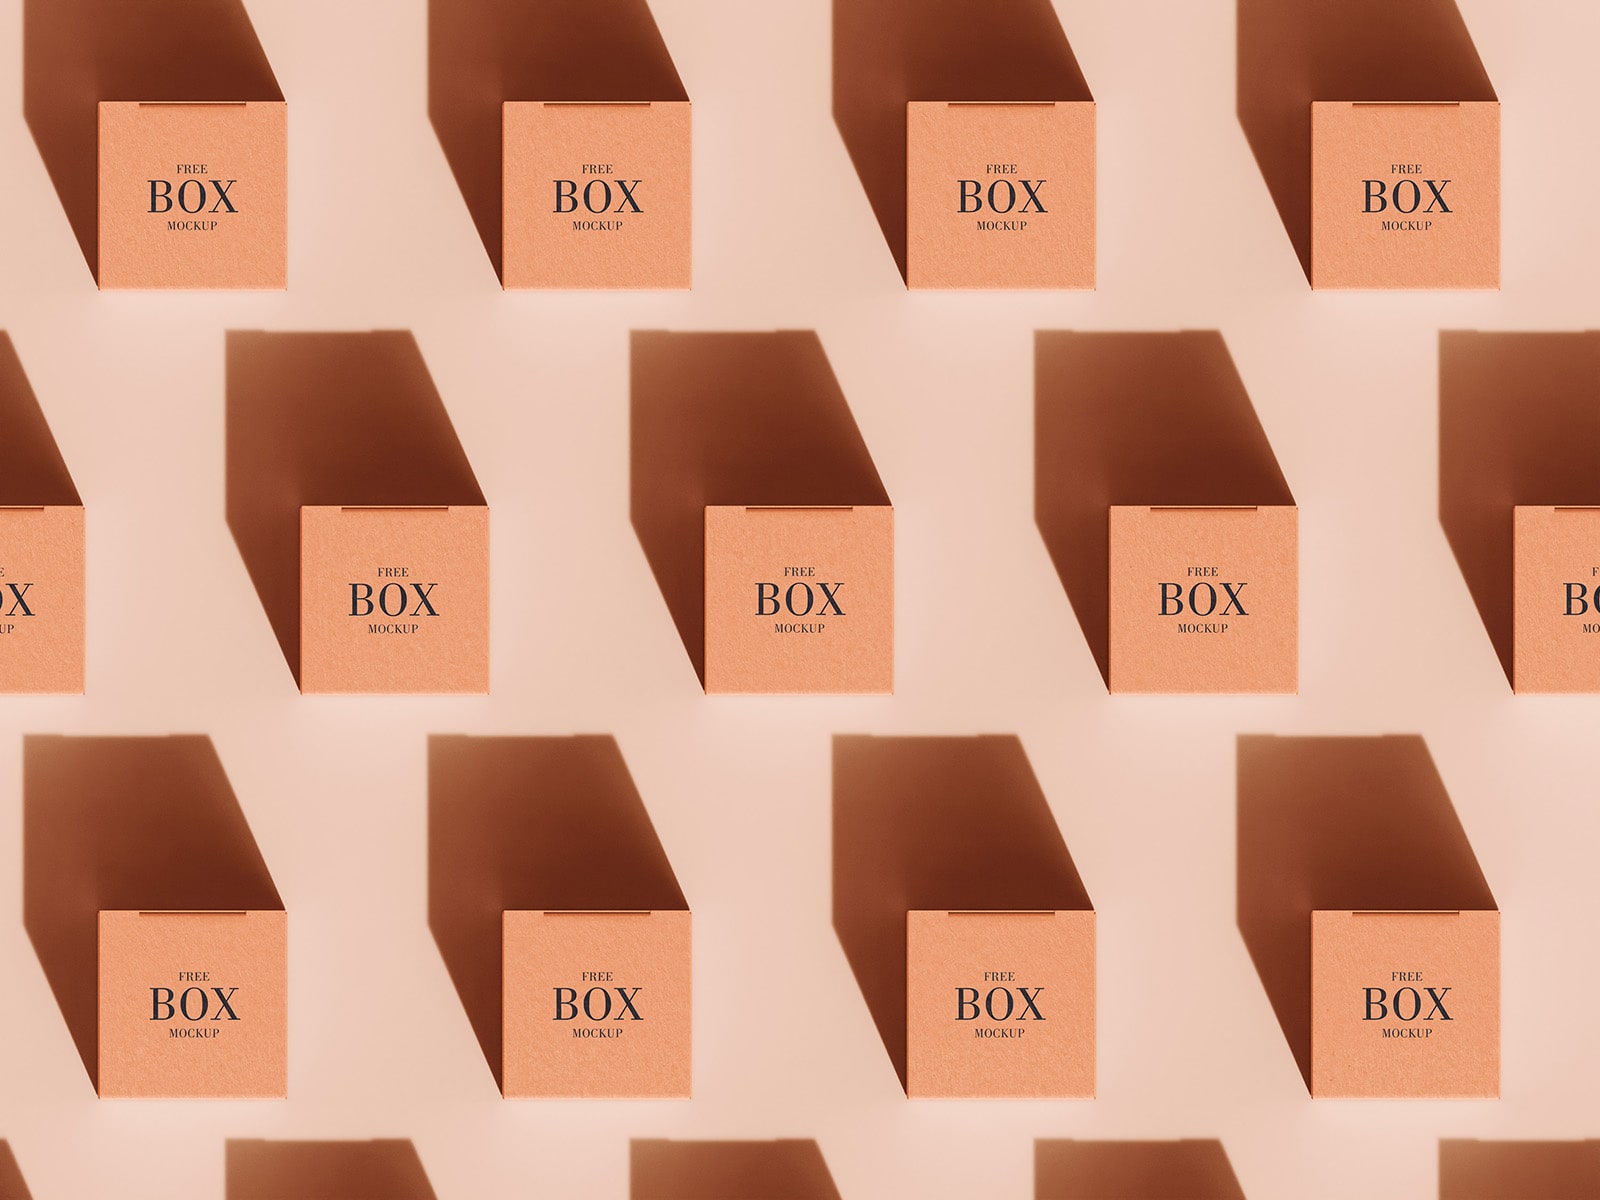 Square Boxes in grid layout mockups